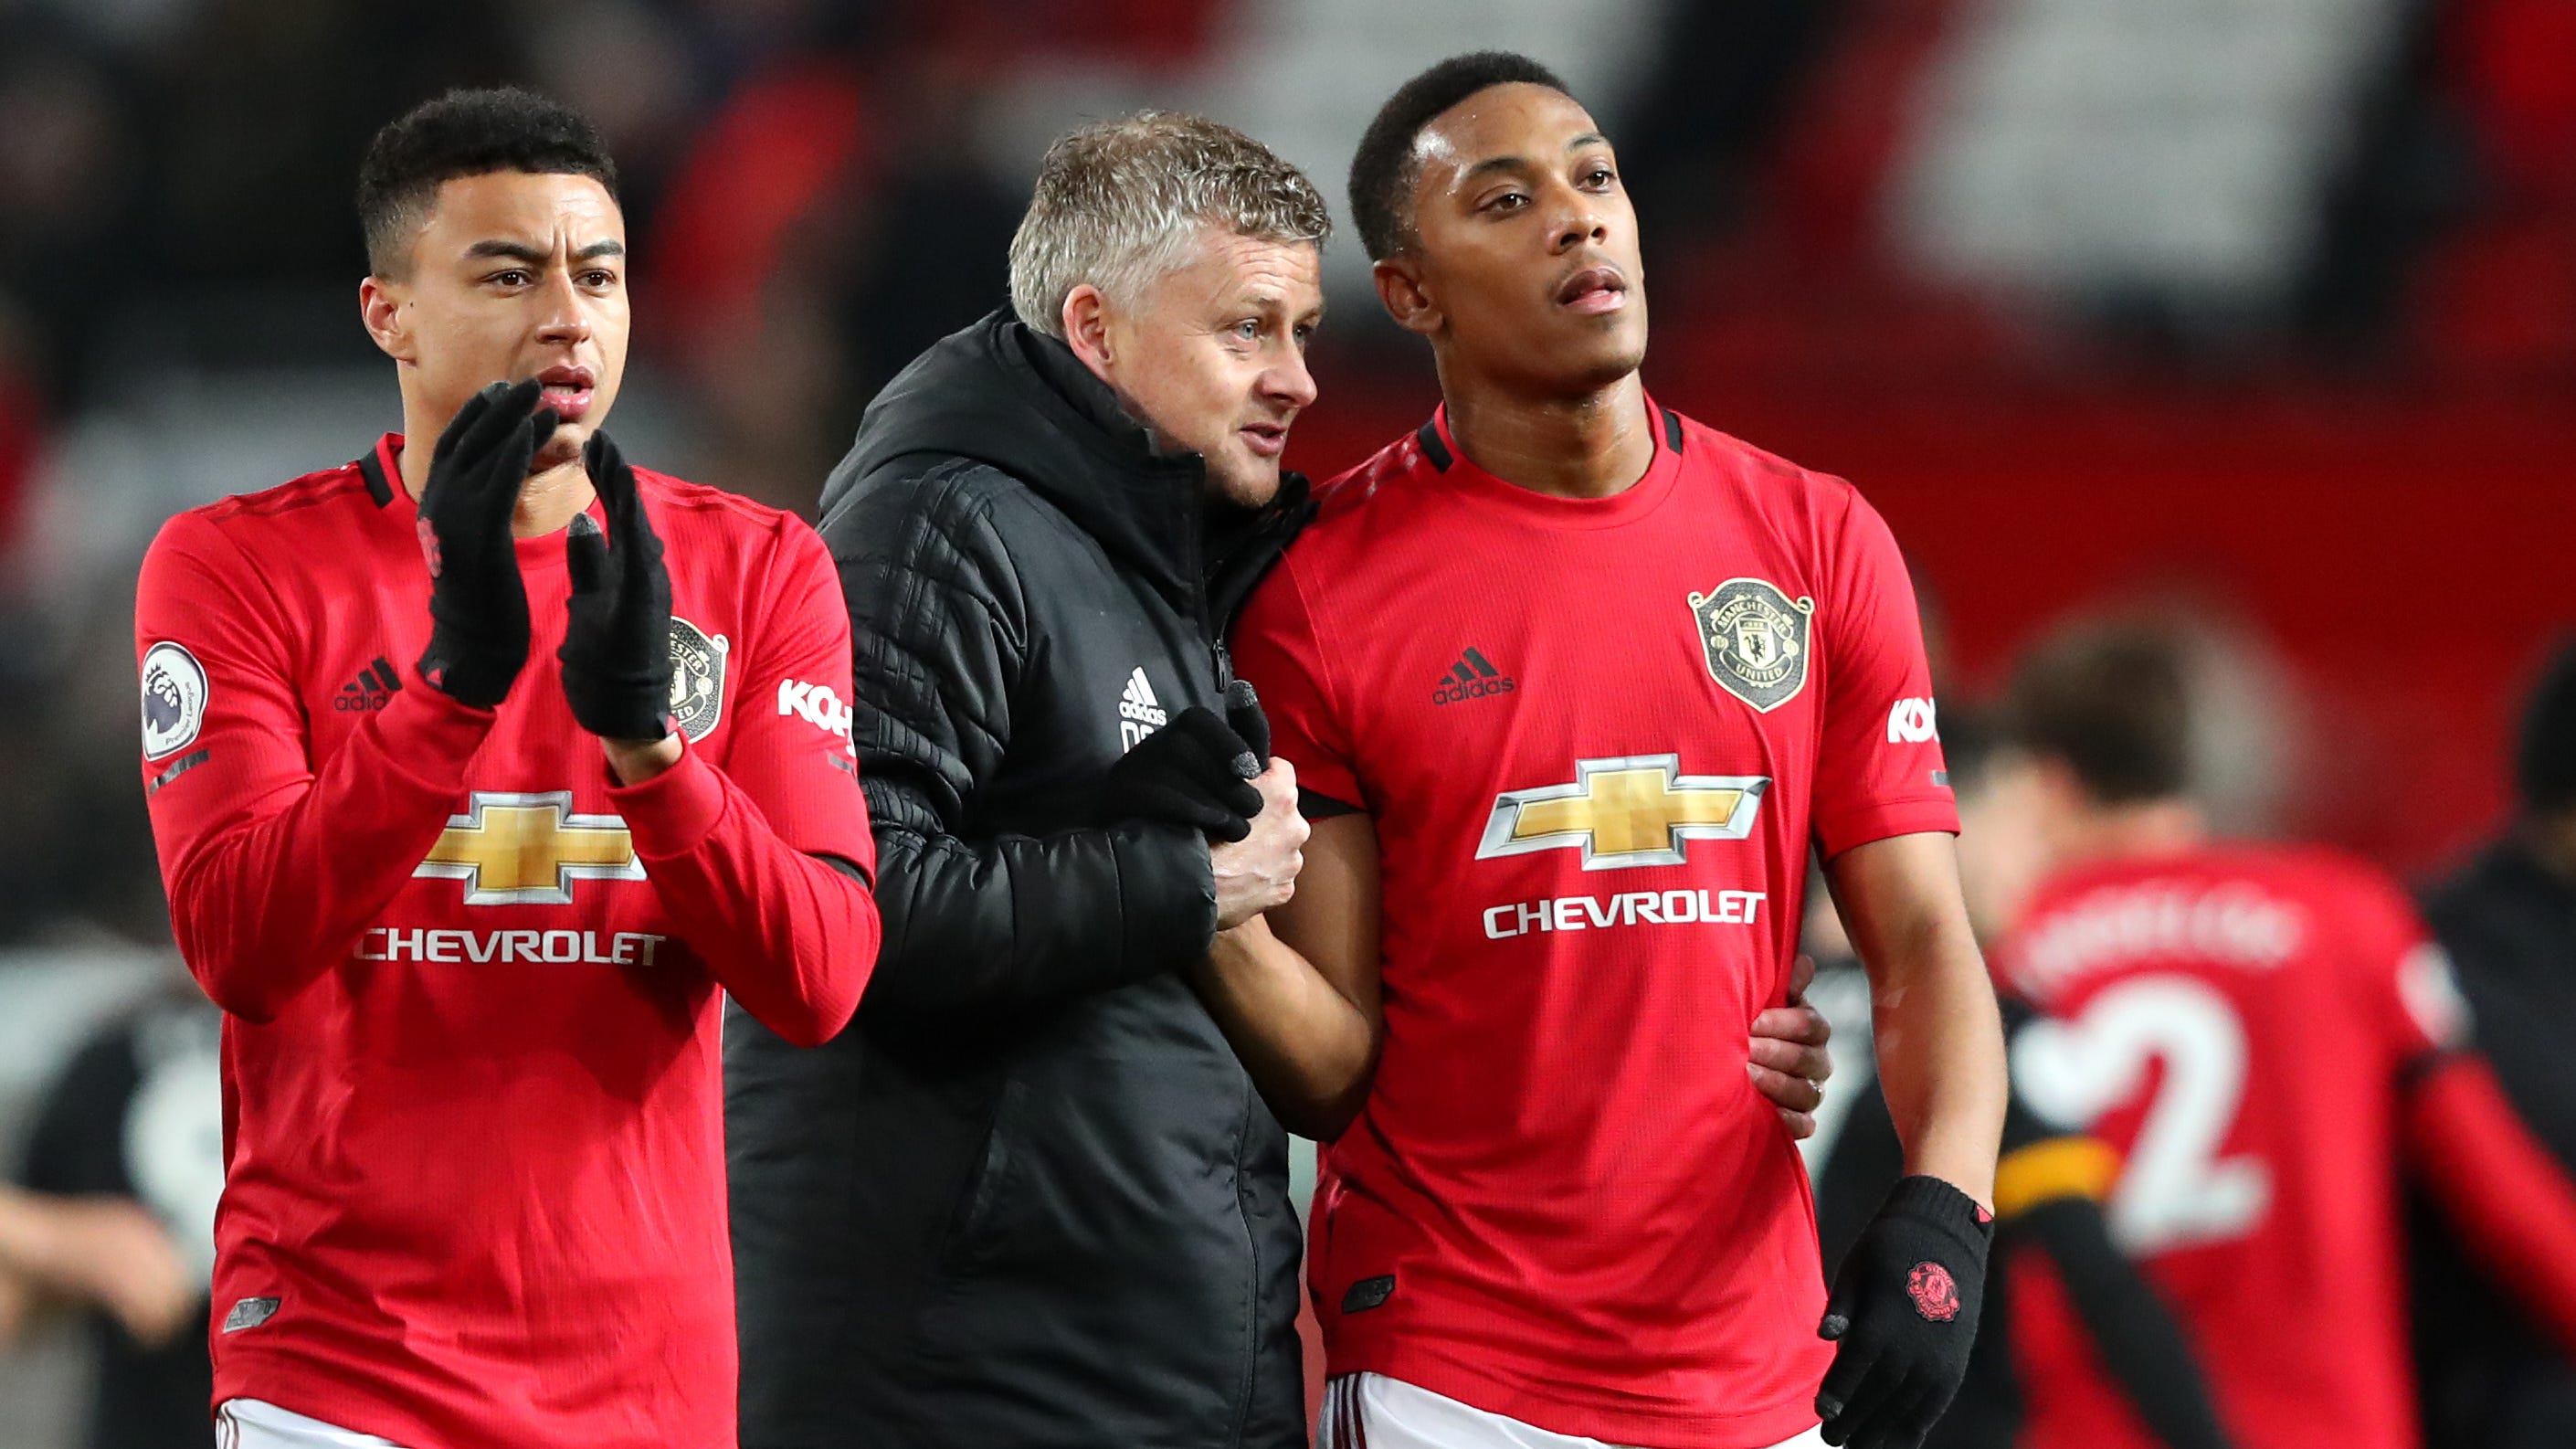 Club Brugge vs Manchester United How to watch in Malaysia, Singapore and Philippines, TV channel, free live stream, kickoff time and squad news Goal United Arab Emirates